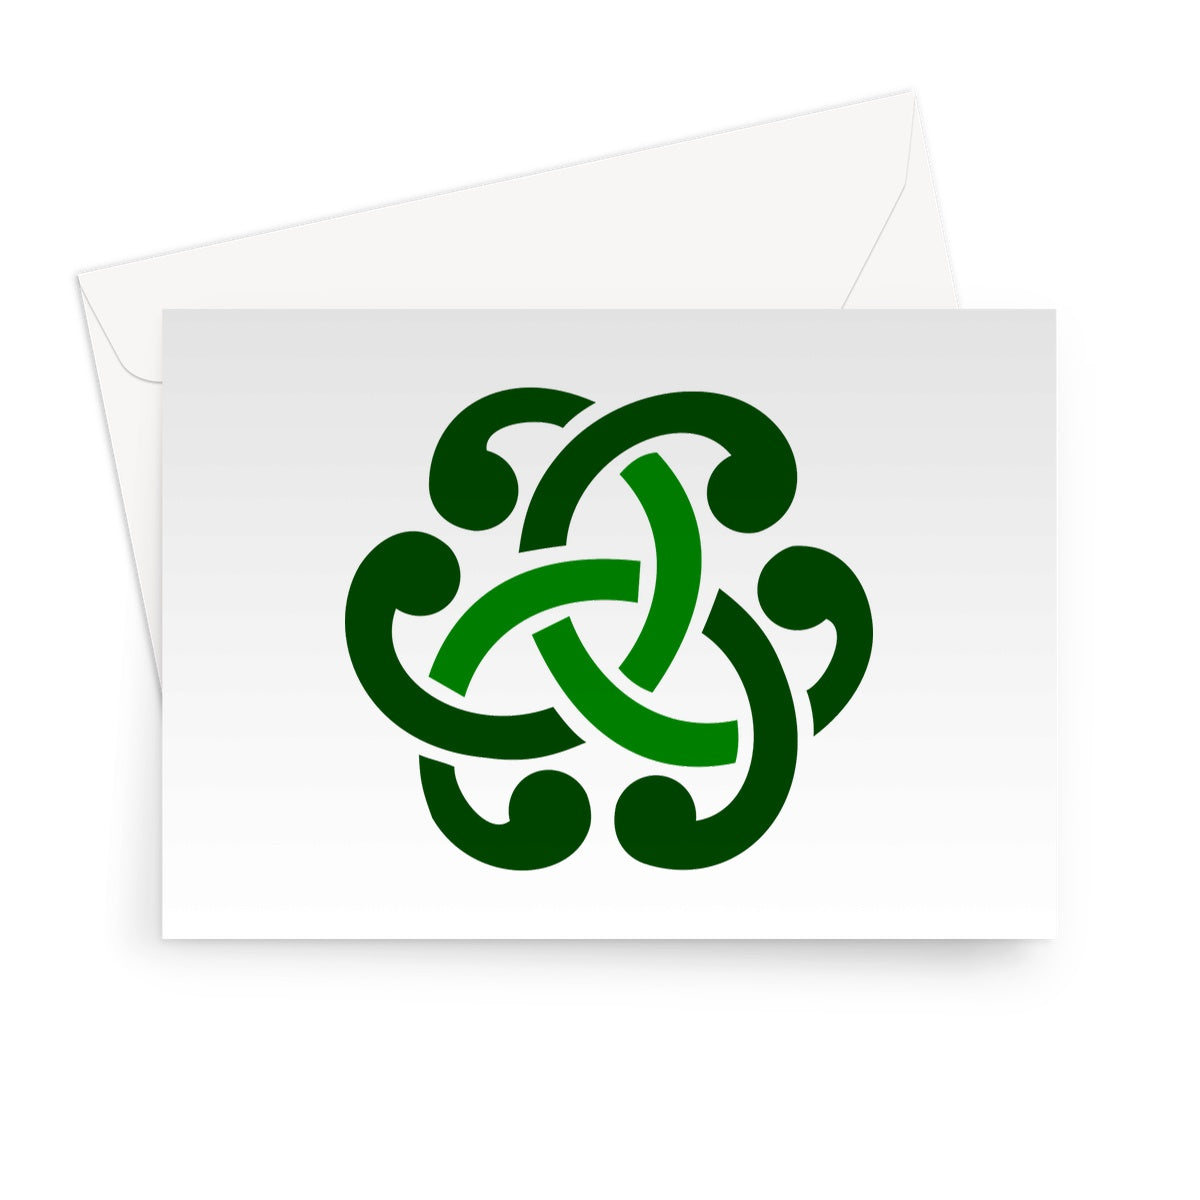 Green Celtic Knot Greeting Card